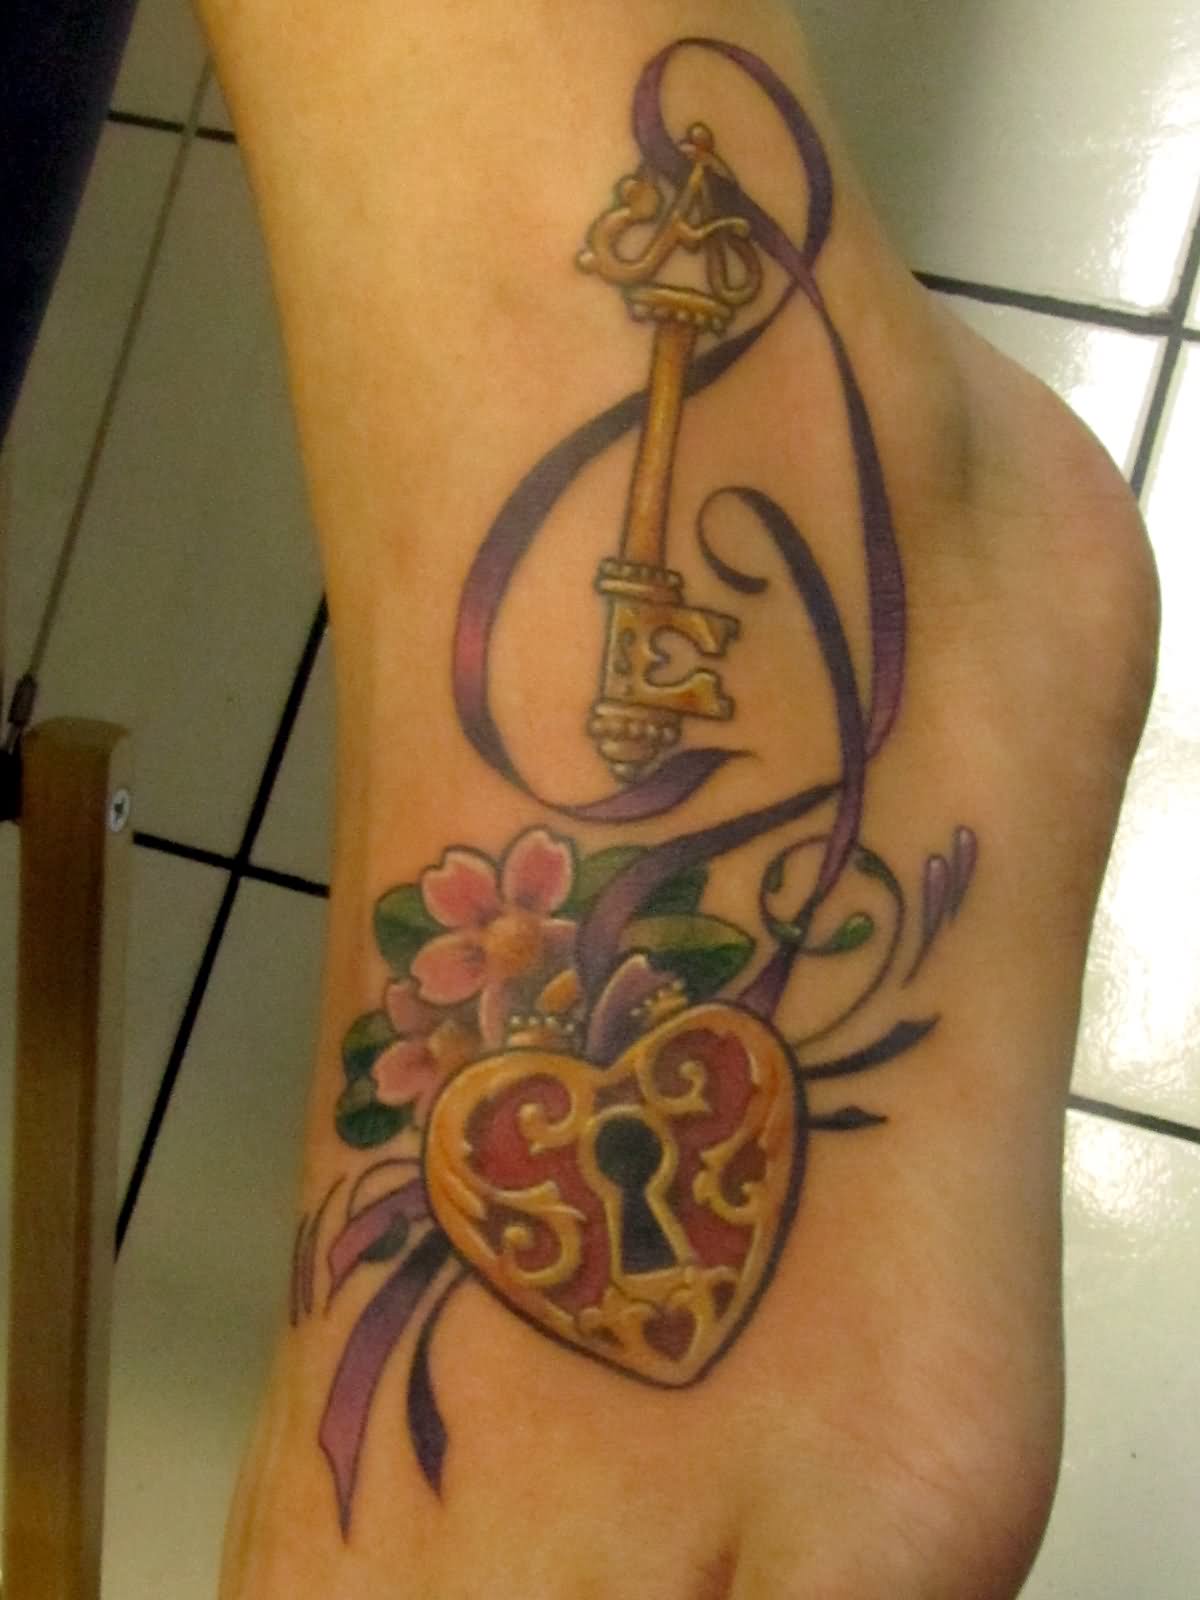 Amazing Heart Lock With Key And Flowers Tattoo On Foot